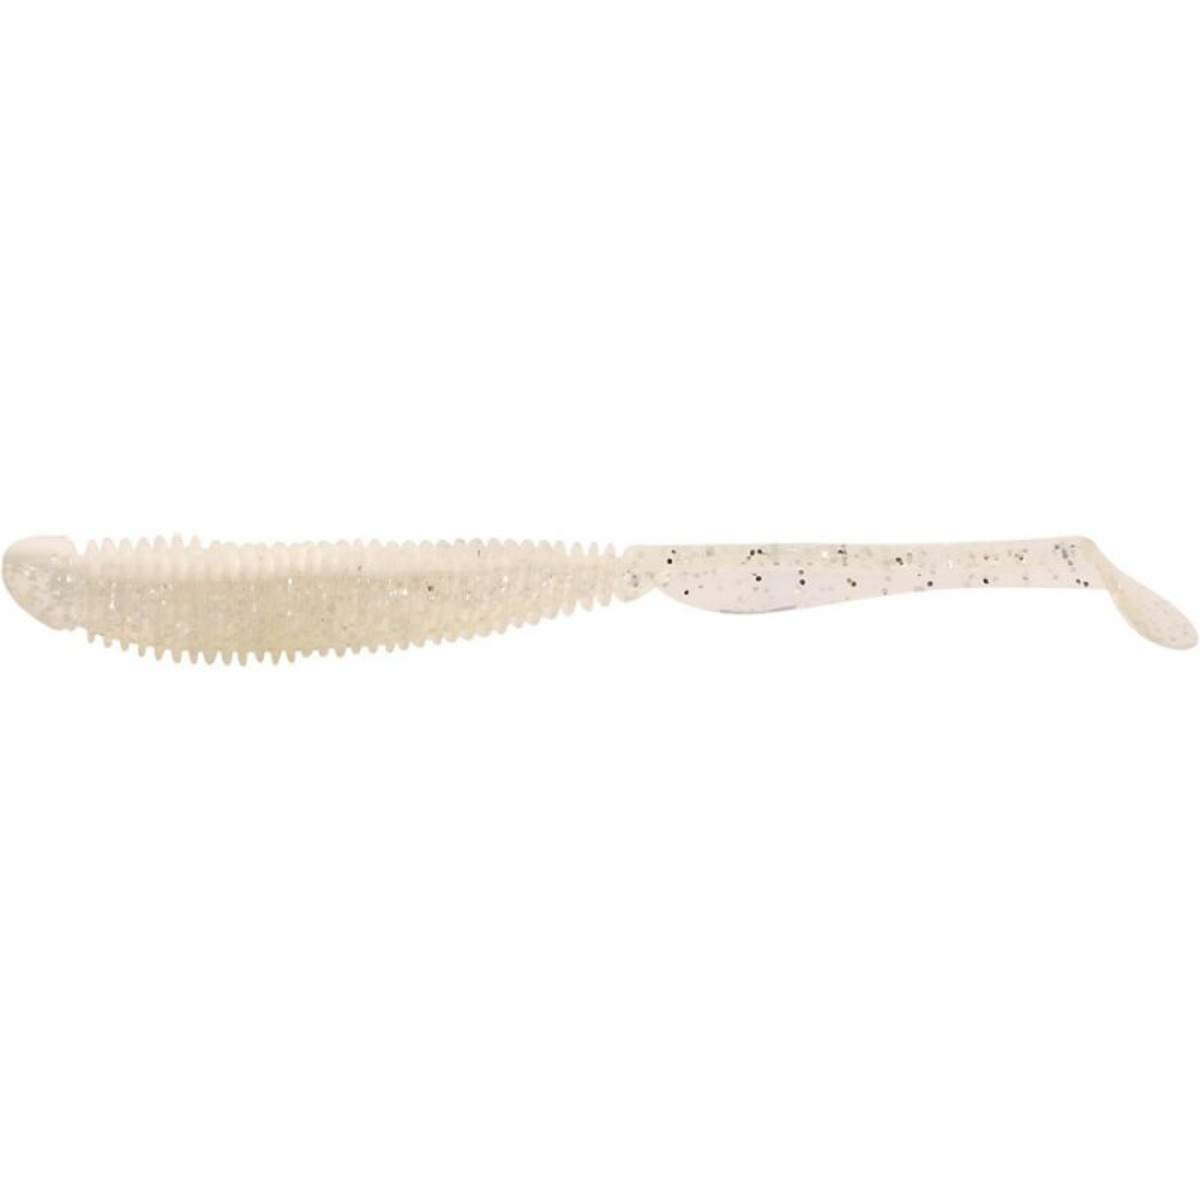 Rapture Soul Shad - 11.5 cm - White Ghost